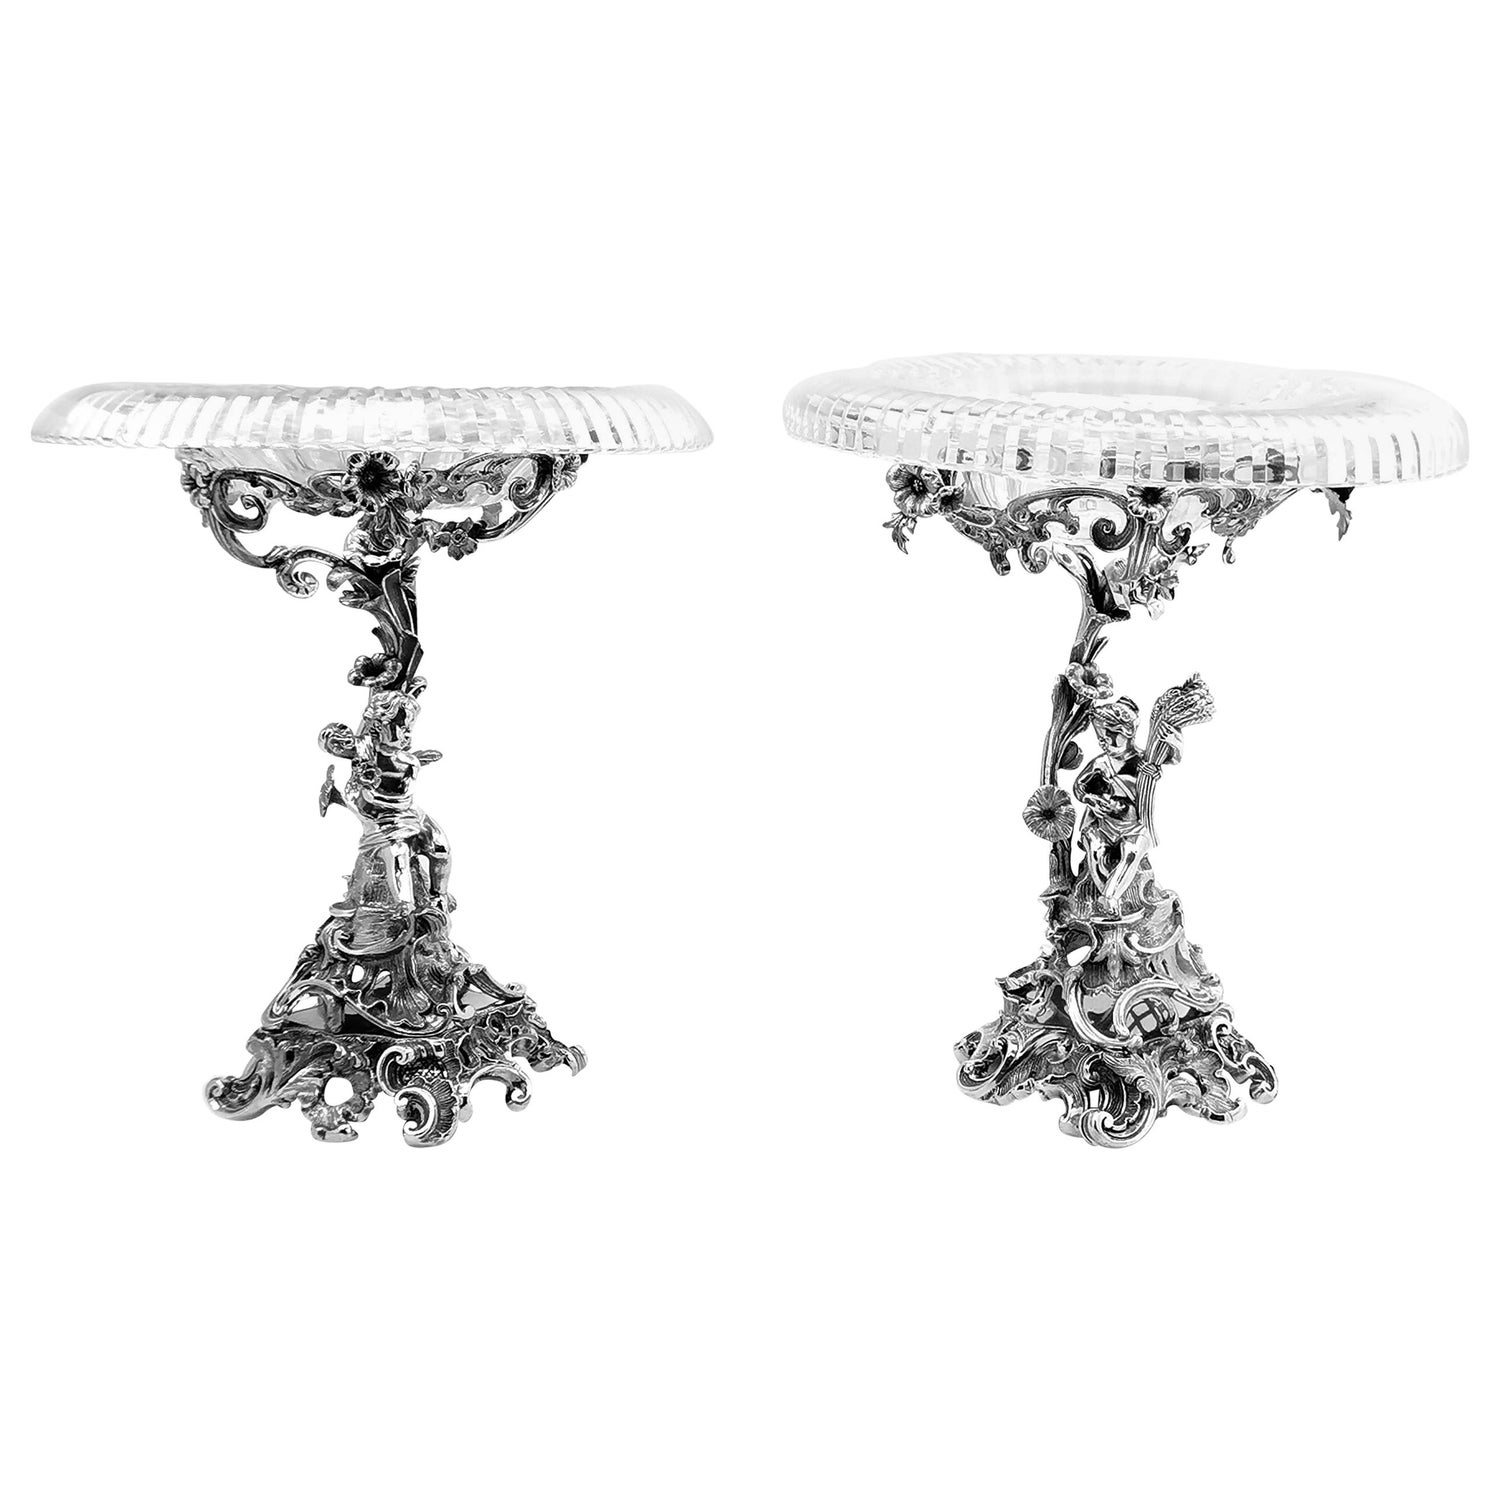 Pair of Antique German Silver and Glass Comports Centrepiece Bowls circa 1870